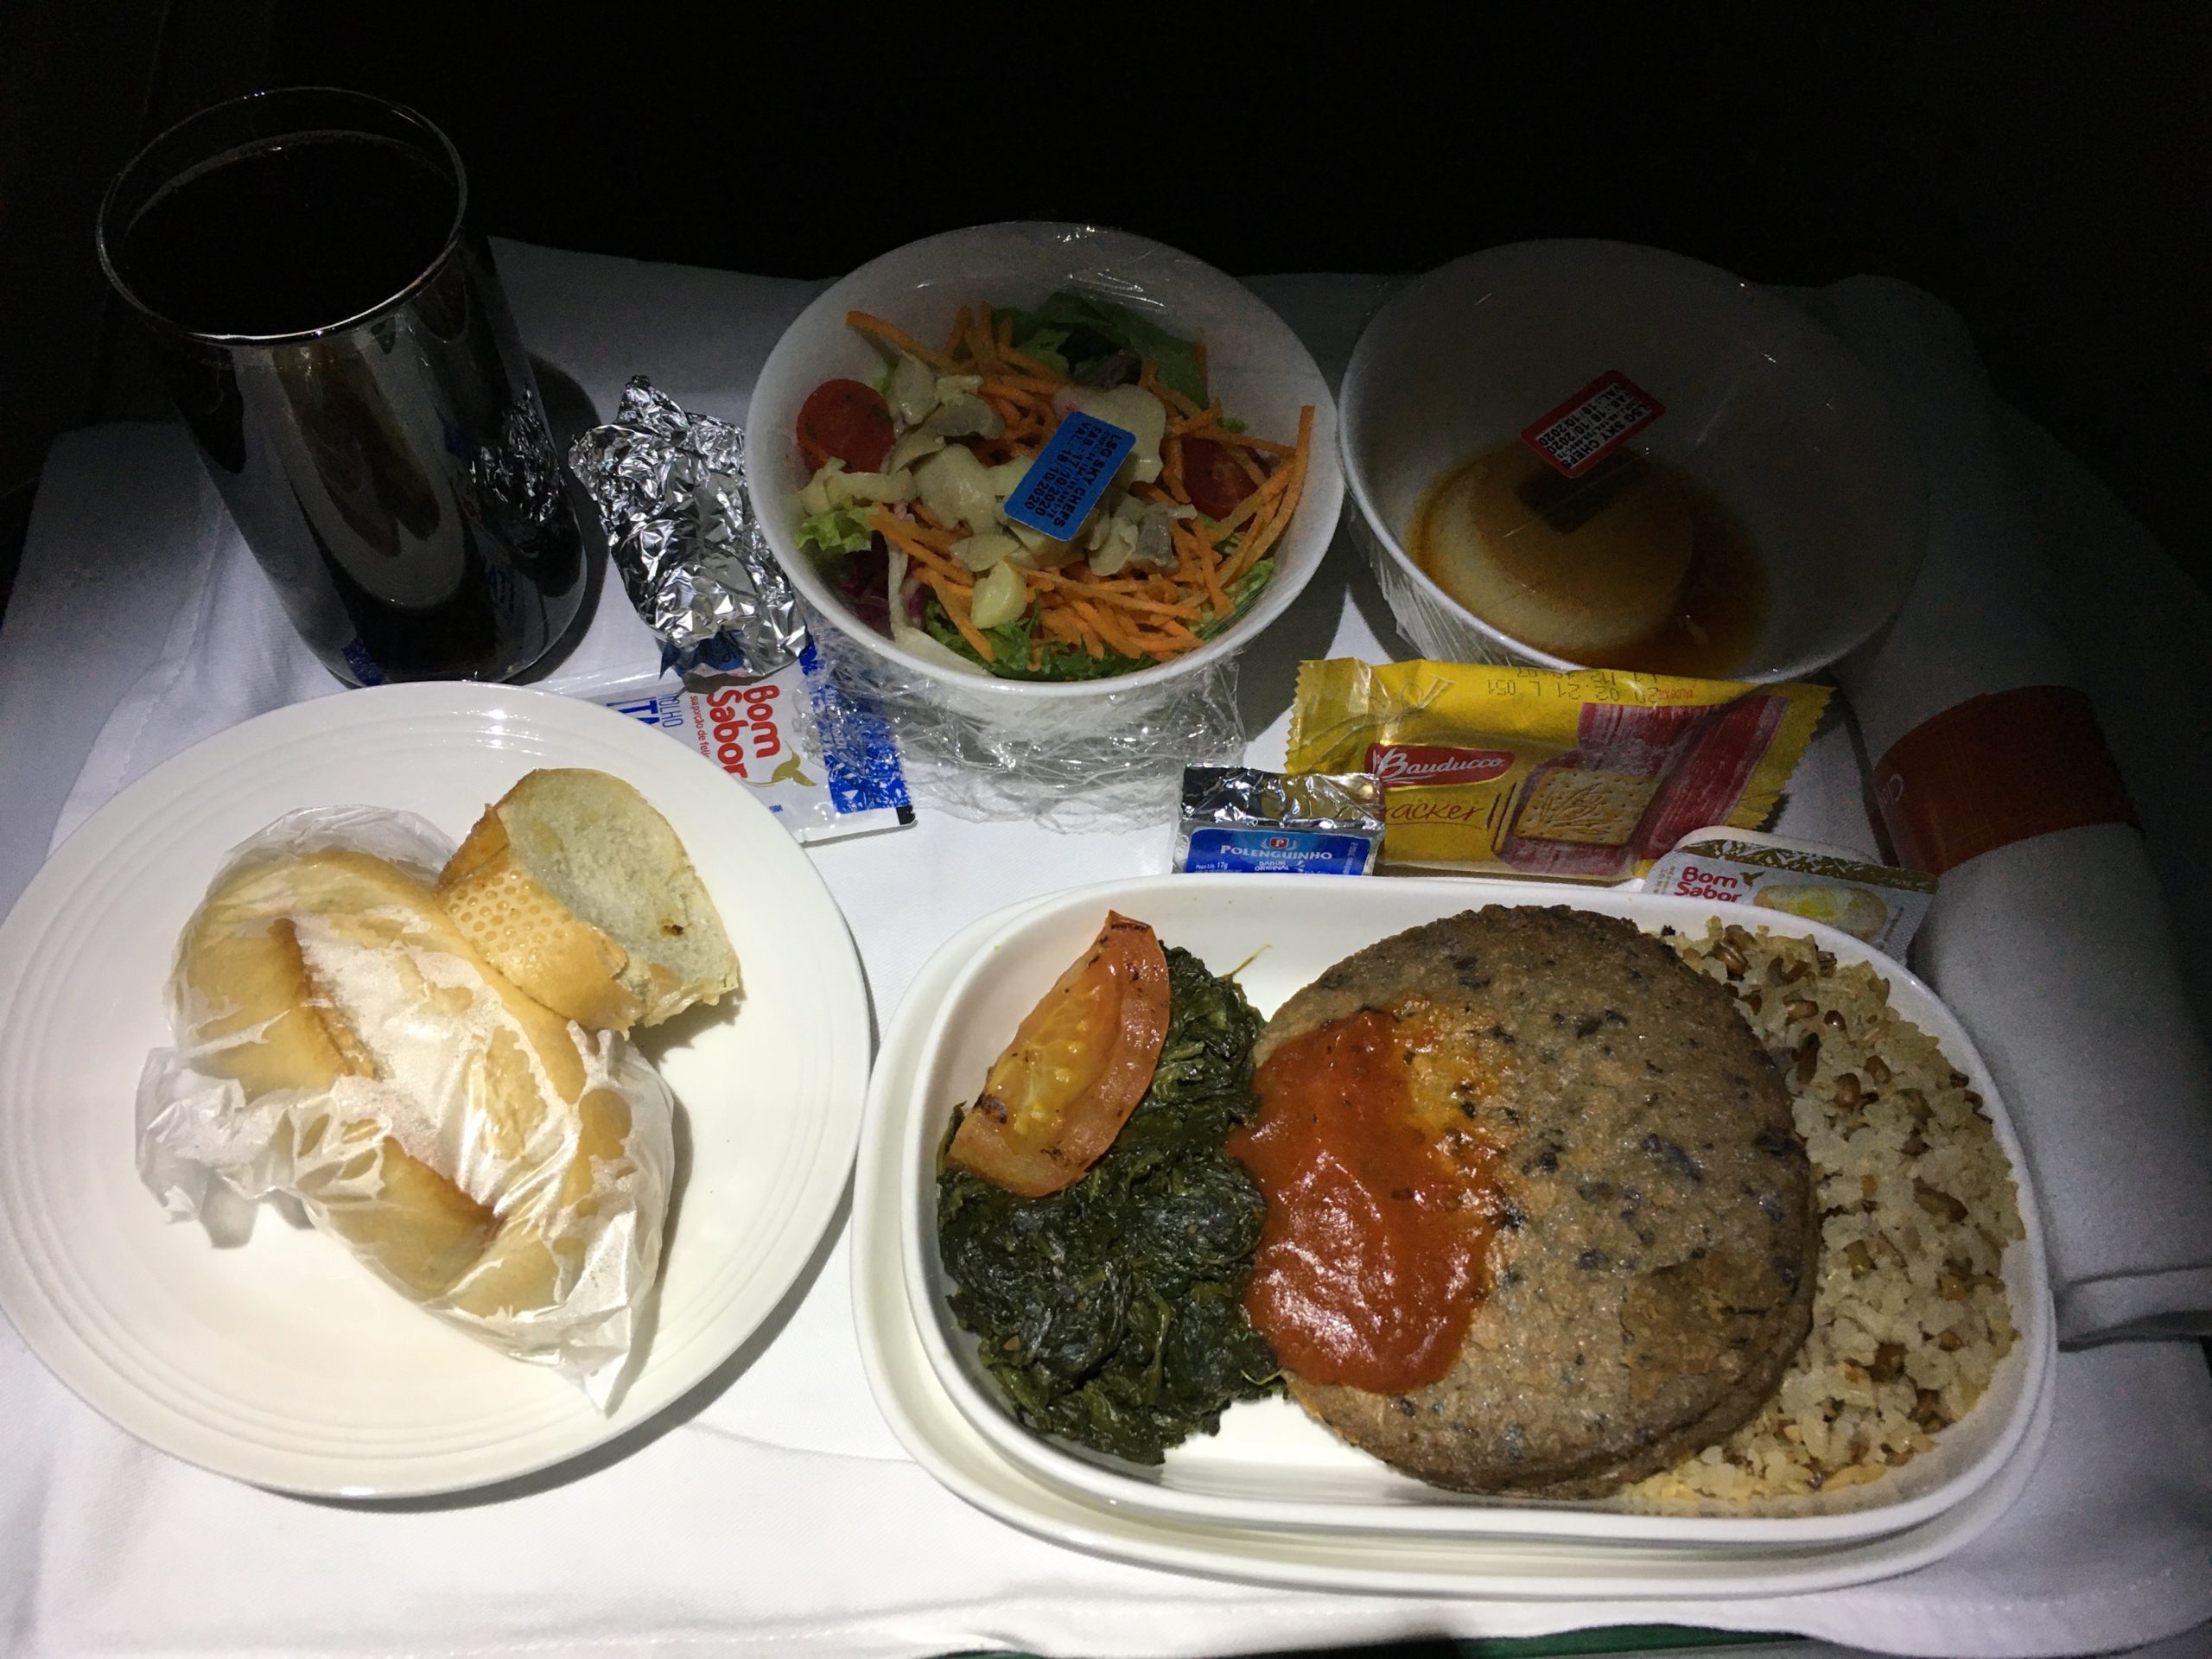 Semi-vegan business class meal - a bit disappointing